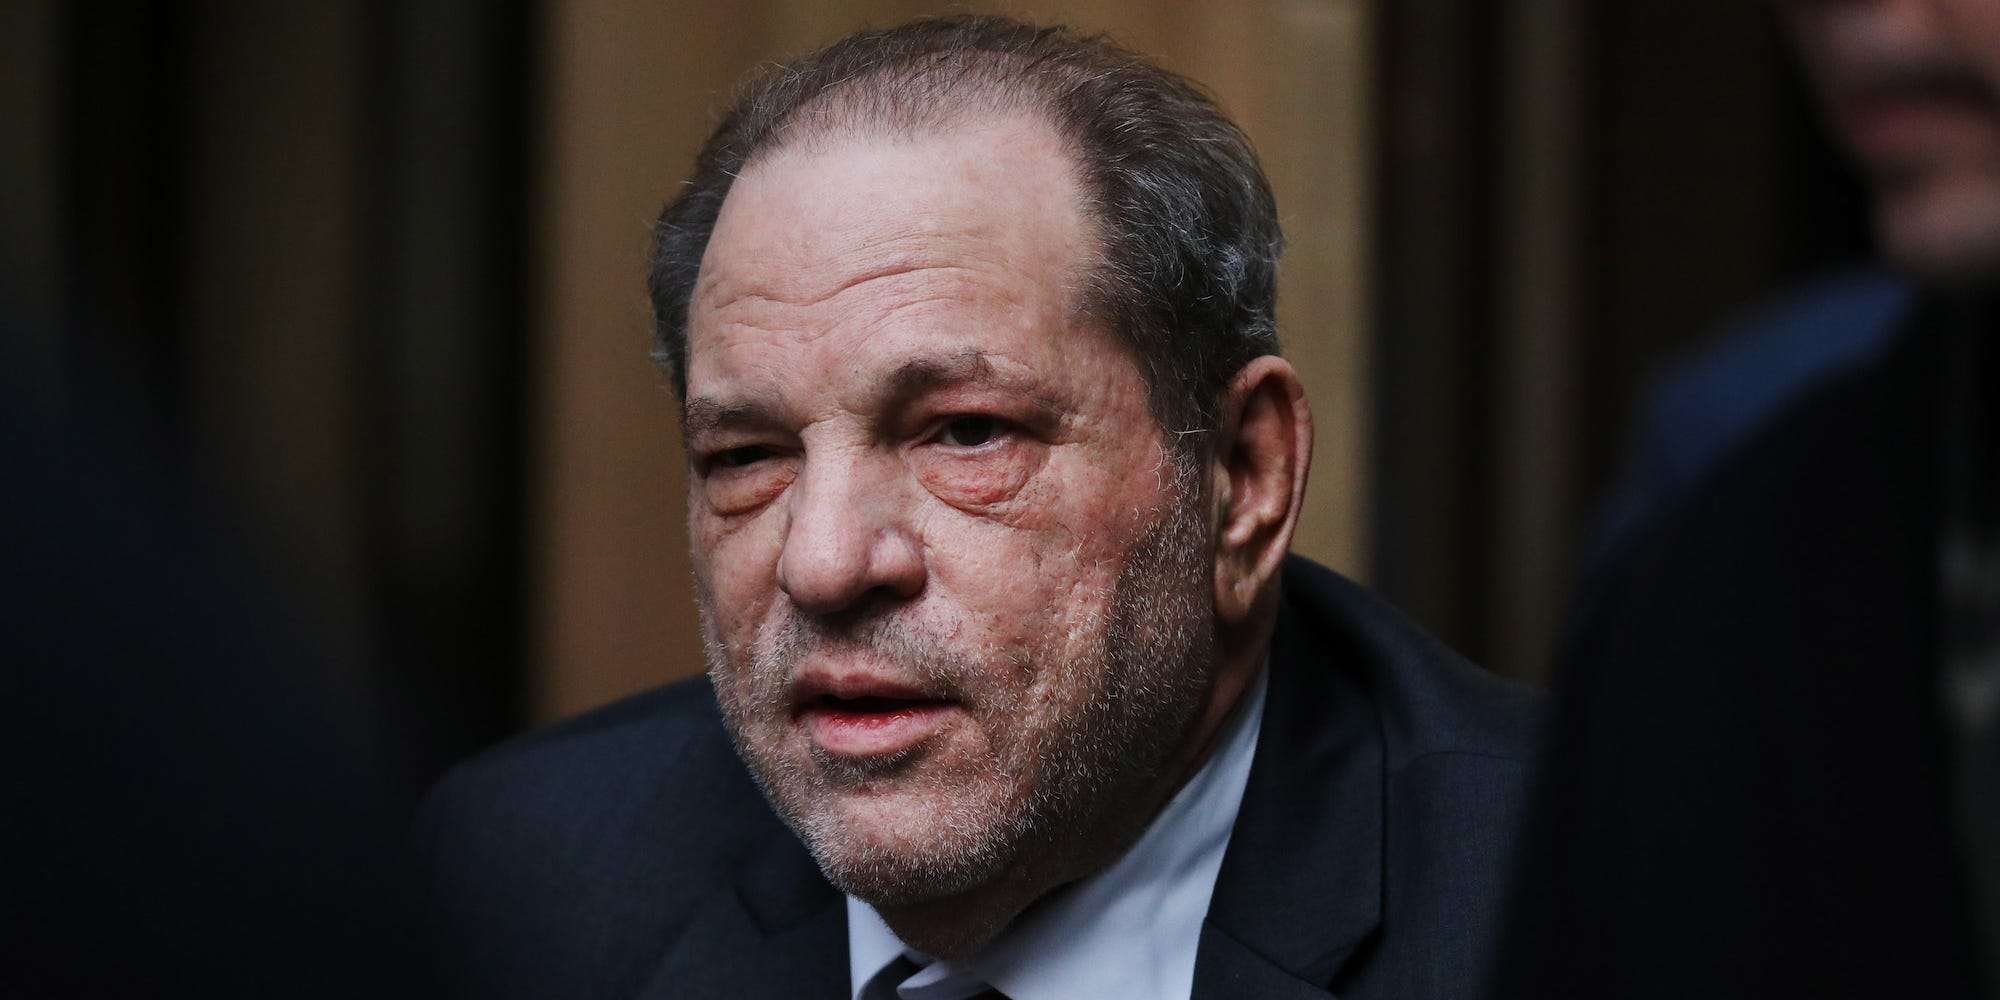 Harvey Weinstein Is Facing 6 New Sex Assault Charges In Los Angeles Stemming From Incidents 2815